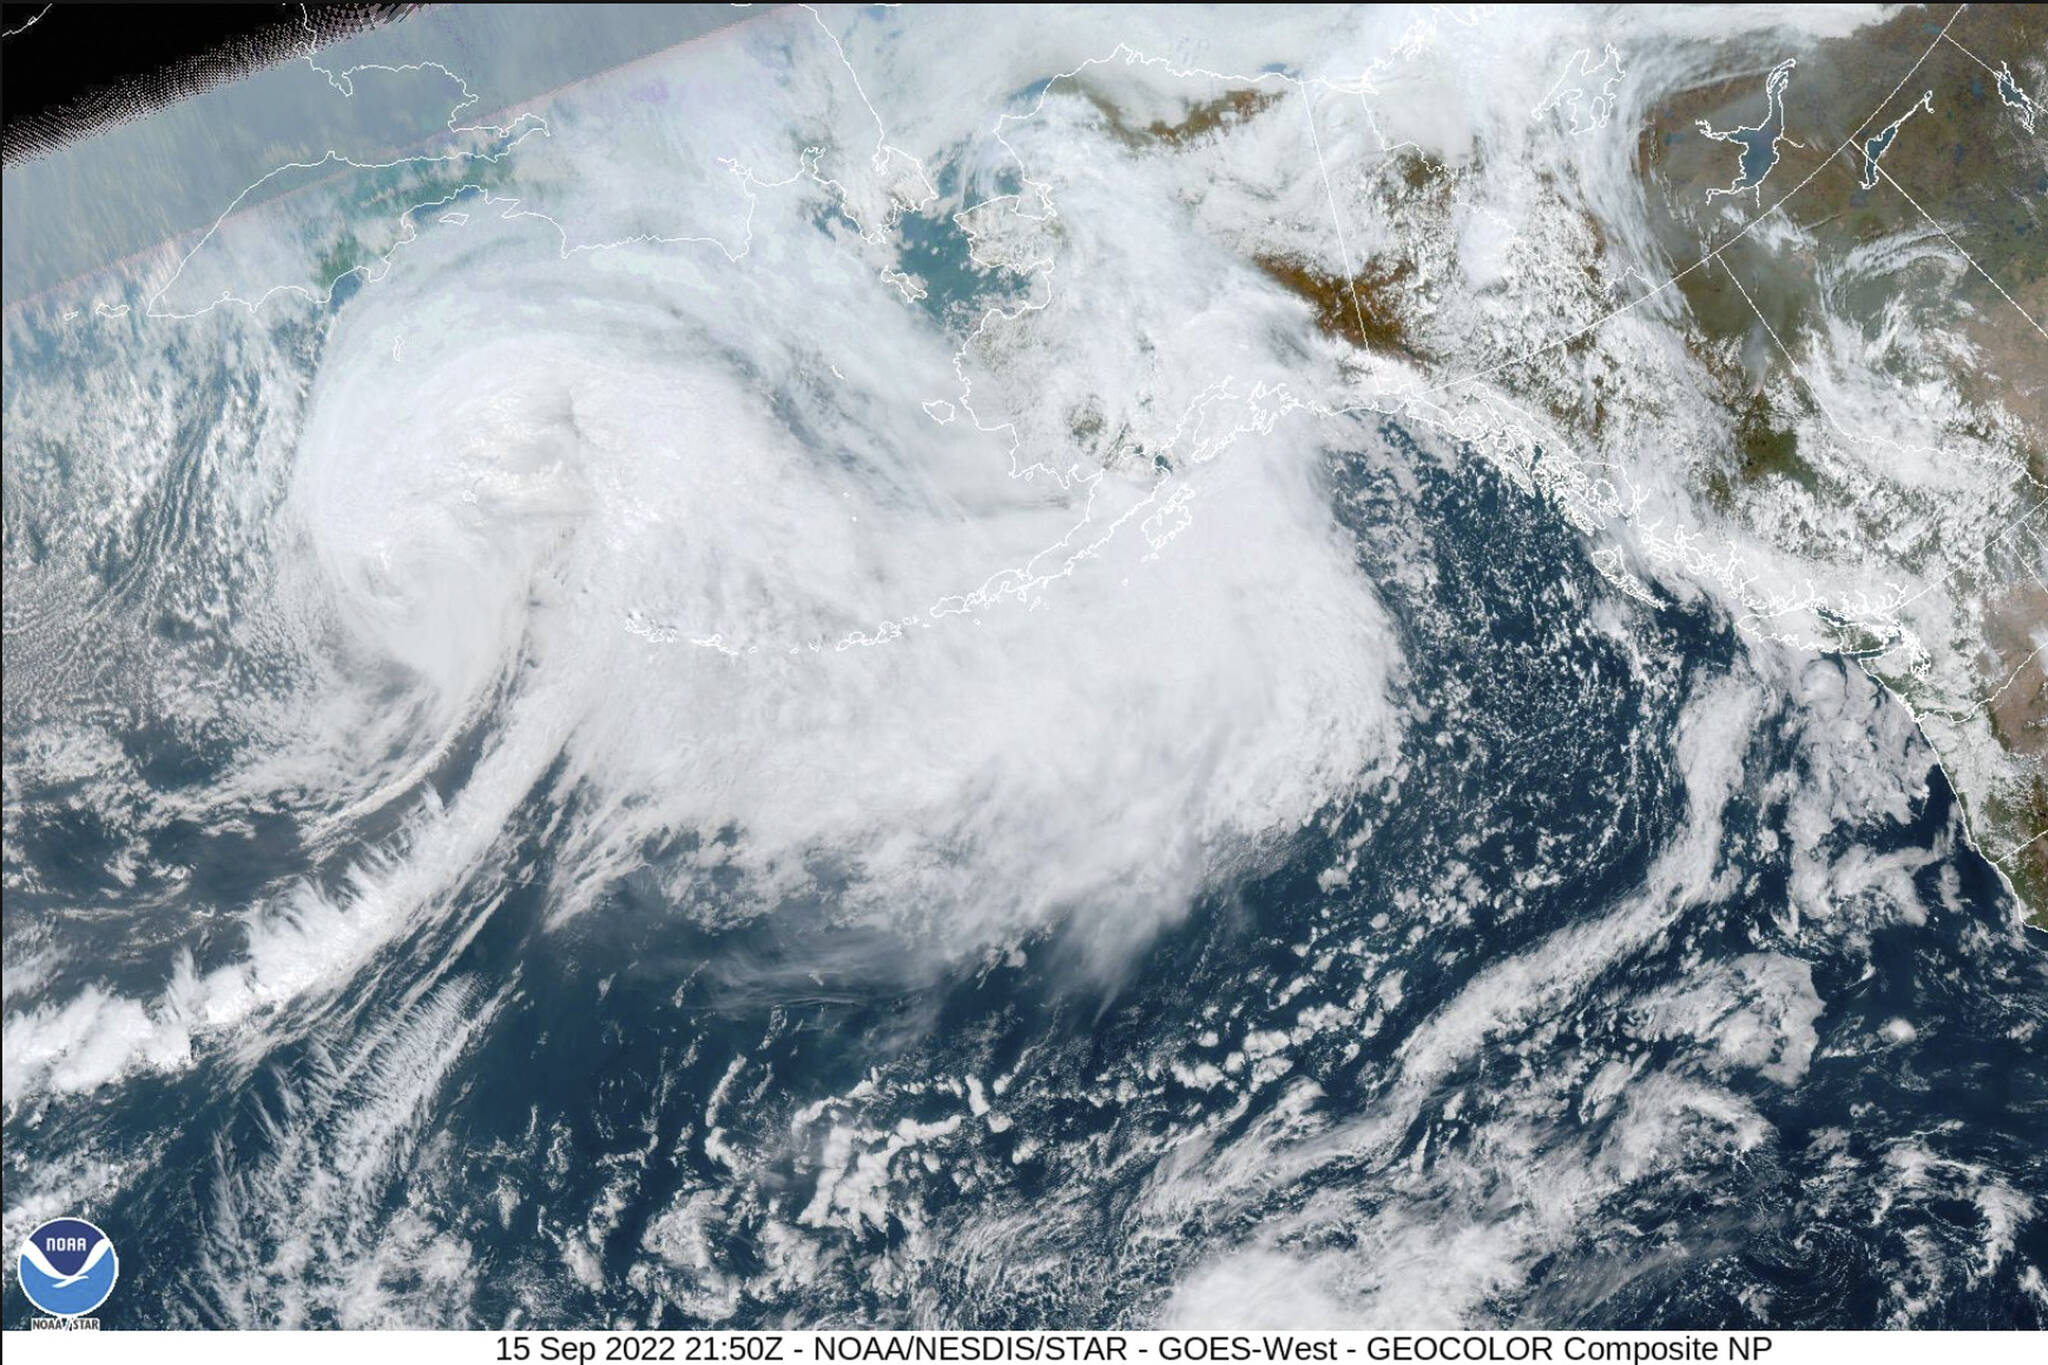 This image provided by the National Hurricane Center and Central Pacific Hurricane Center/National Oceanic and Atmospheric Administration shows a satellite view over Alaska, Thursday, Sept. 15, 2022. A vast swath of western Alaska could see flooding and high winds as the remnants of Typhoon Merbok move toward the Bering Sea region. The National Weather Service had in place coastal flood warnings, beginning Friday, spanning from parts of the Yukon Delta in southwest Alaska up to St. Lawrence Island in the Bering Sea and to the Bering Strait coast. (NOAA via AP)